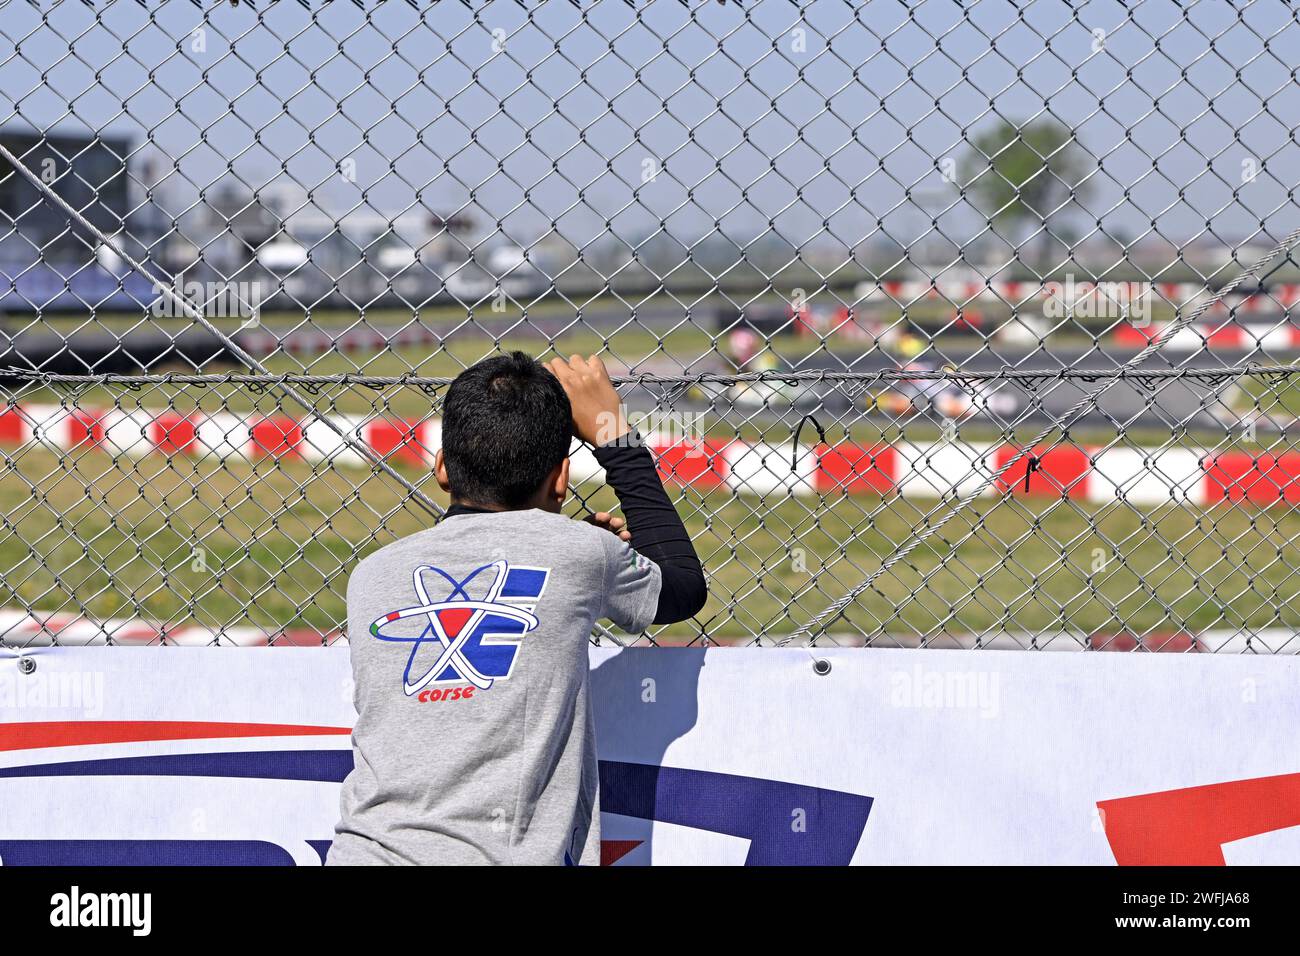 Young pilot leaning on the net and watching race tests at the Go-karting circuit Stock Photo